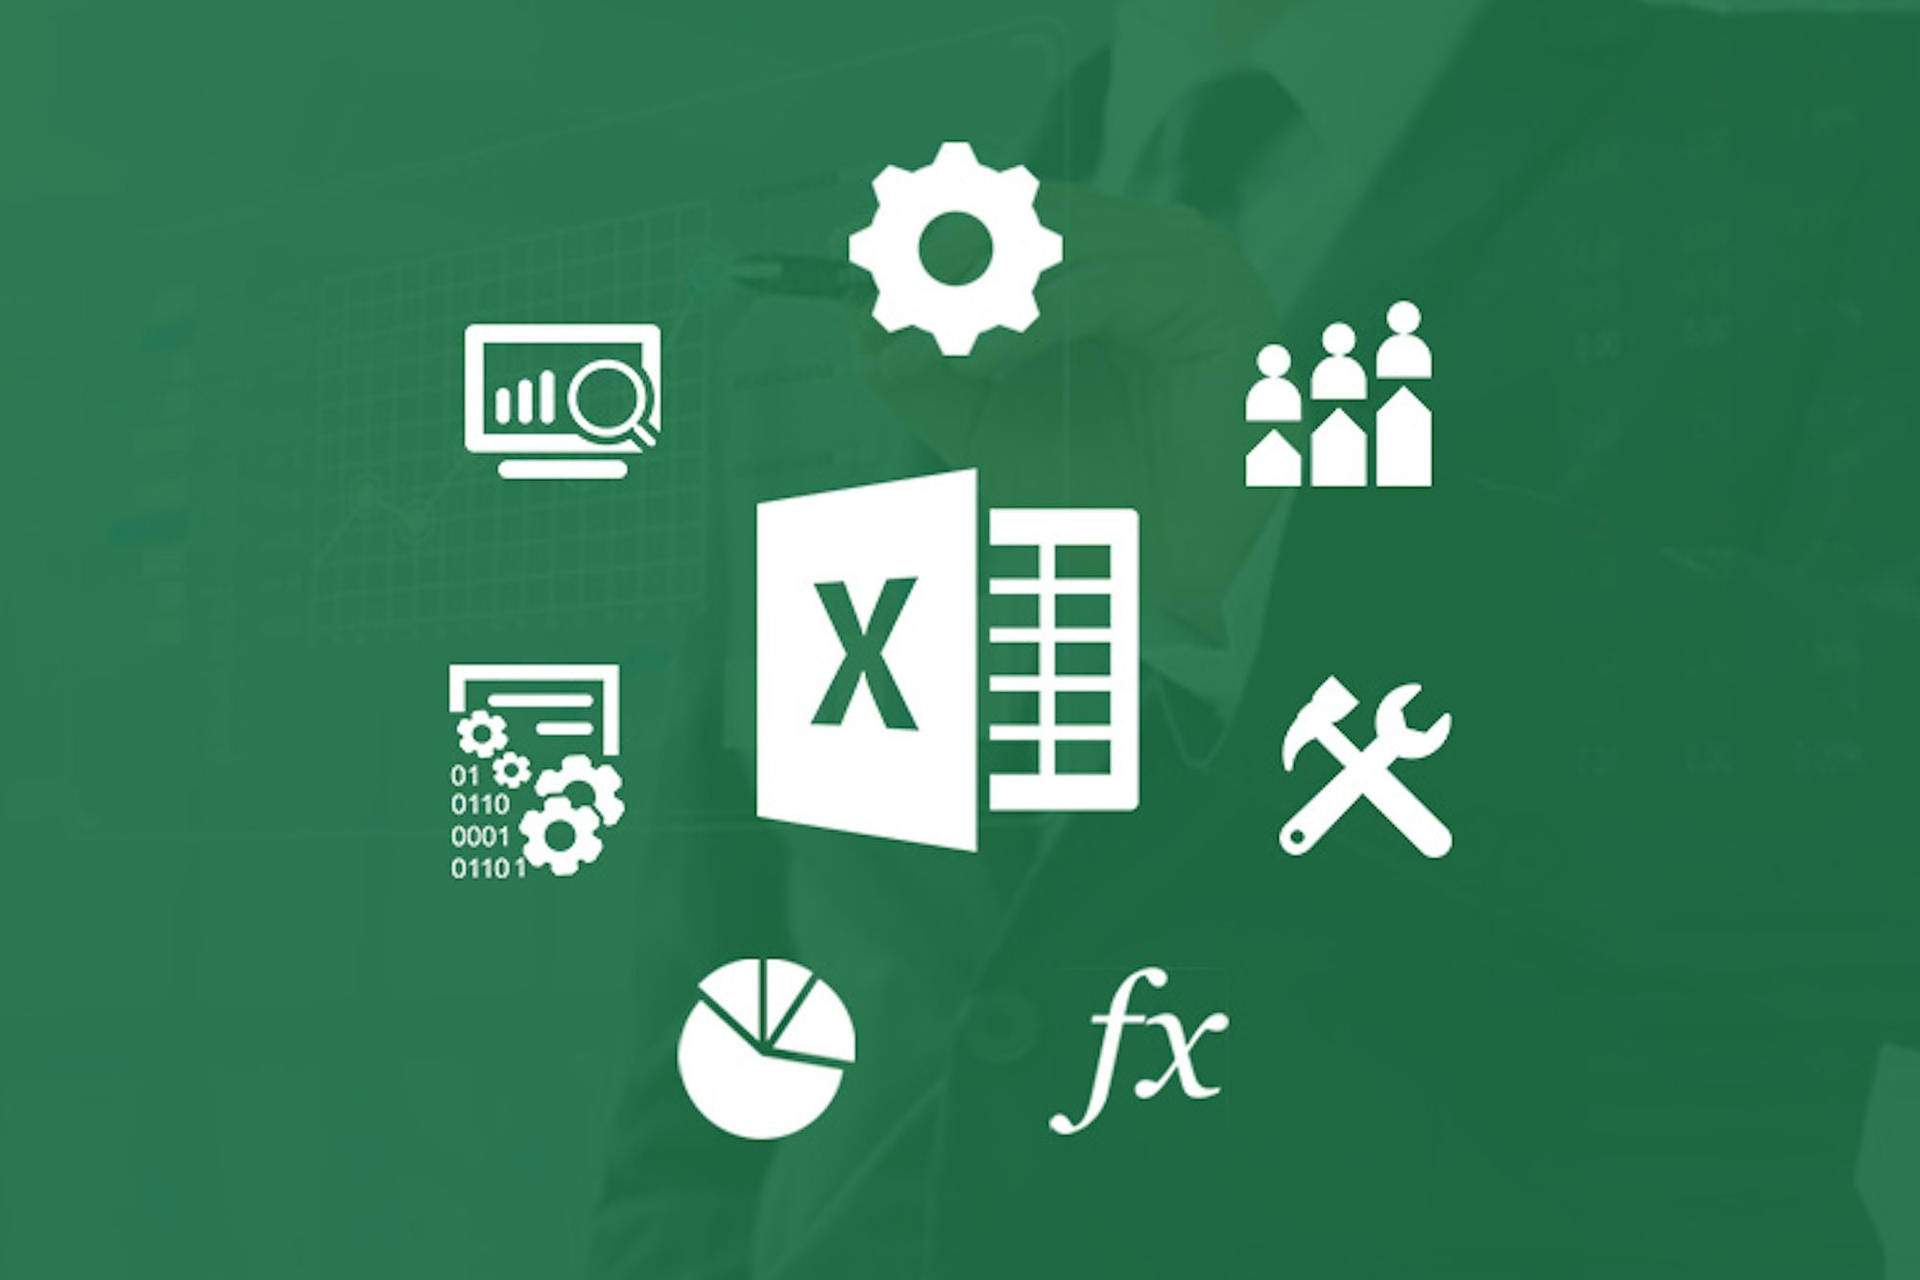 What is Microsoft Excel used for?